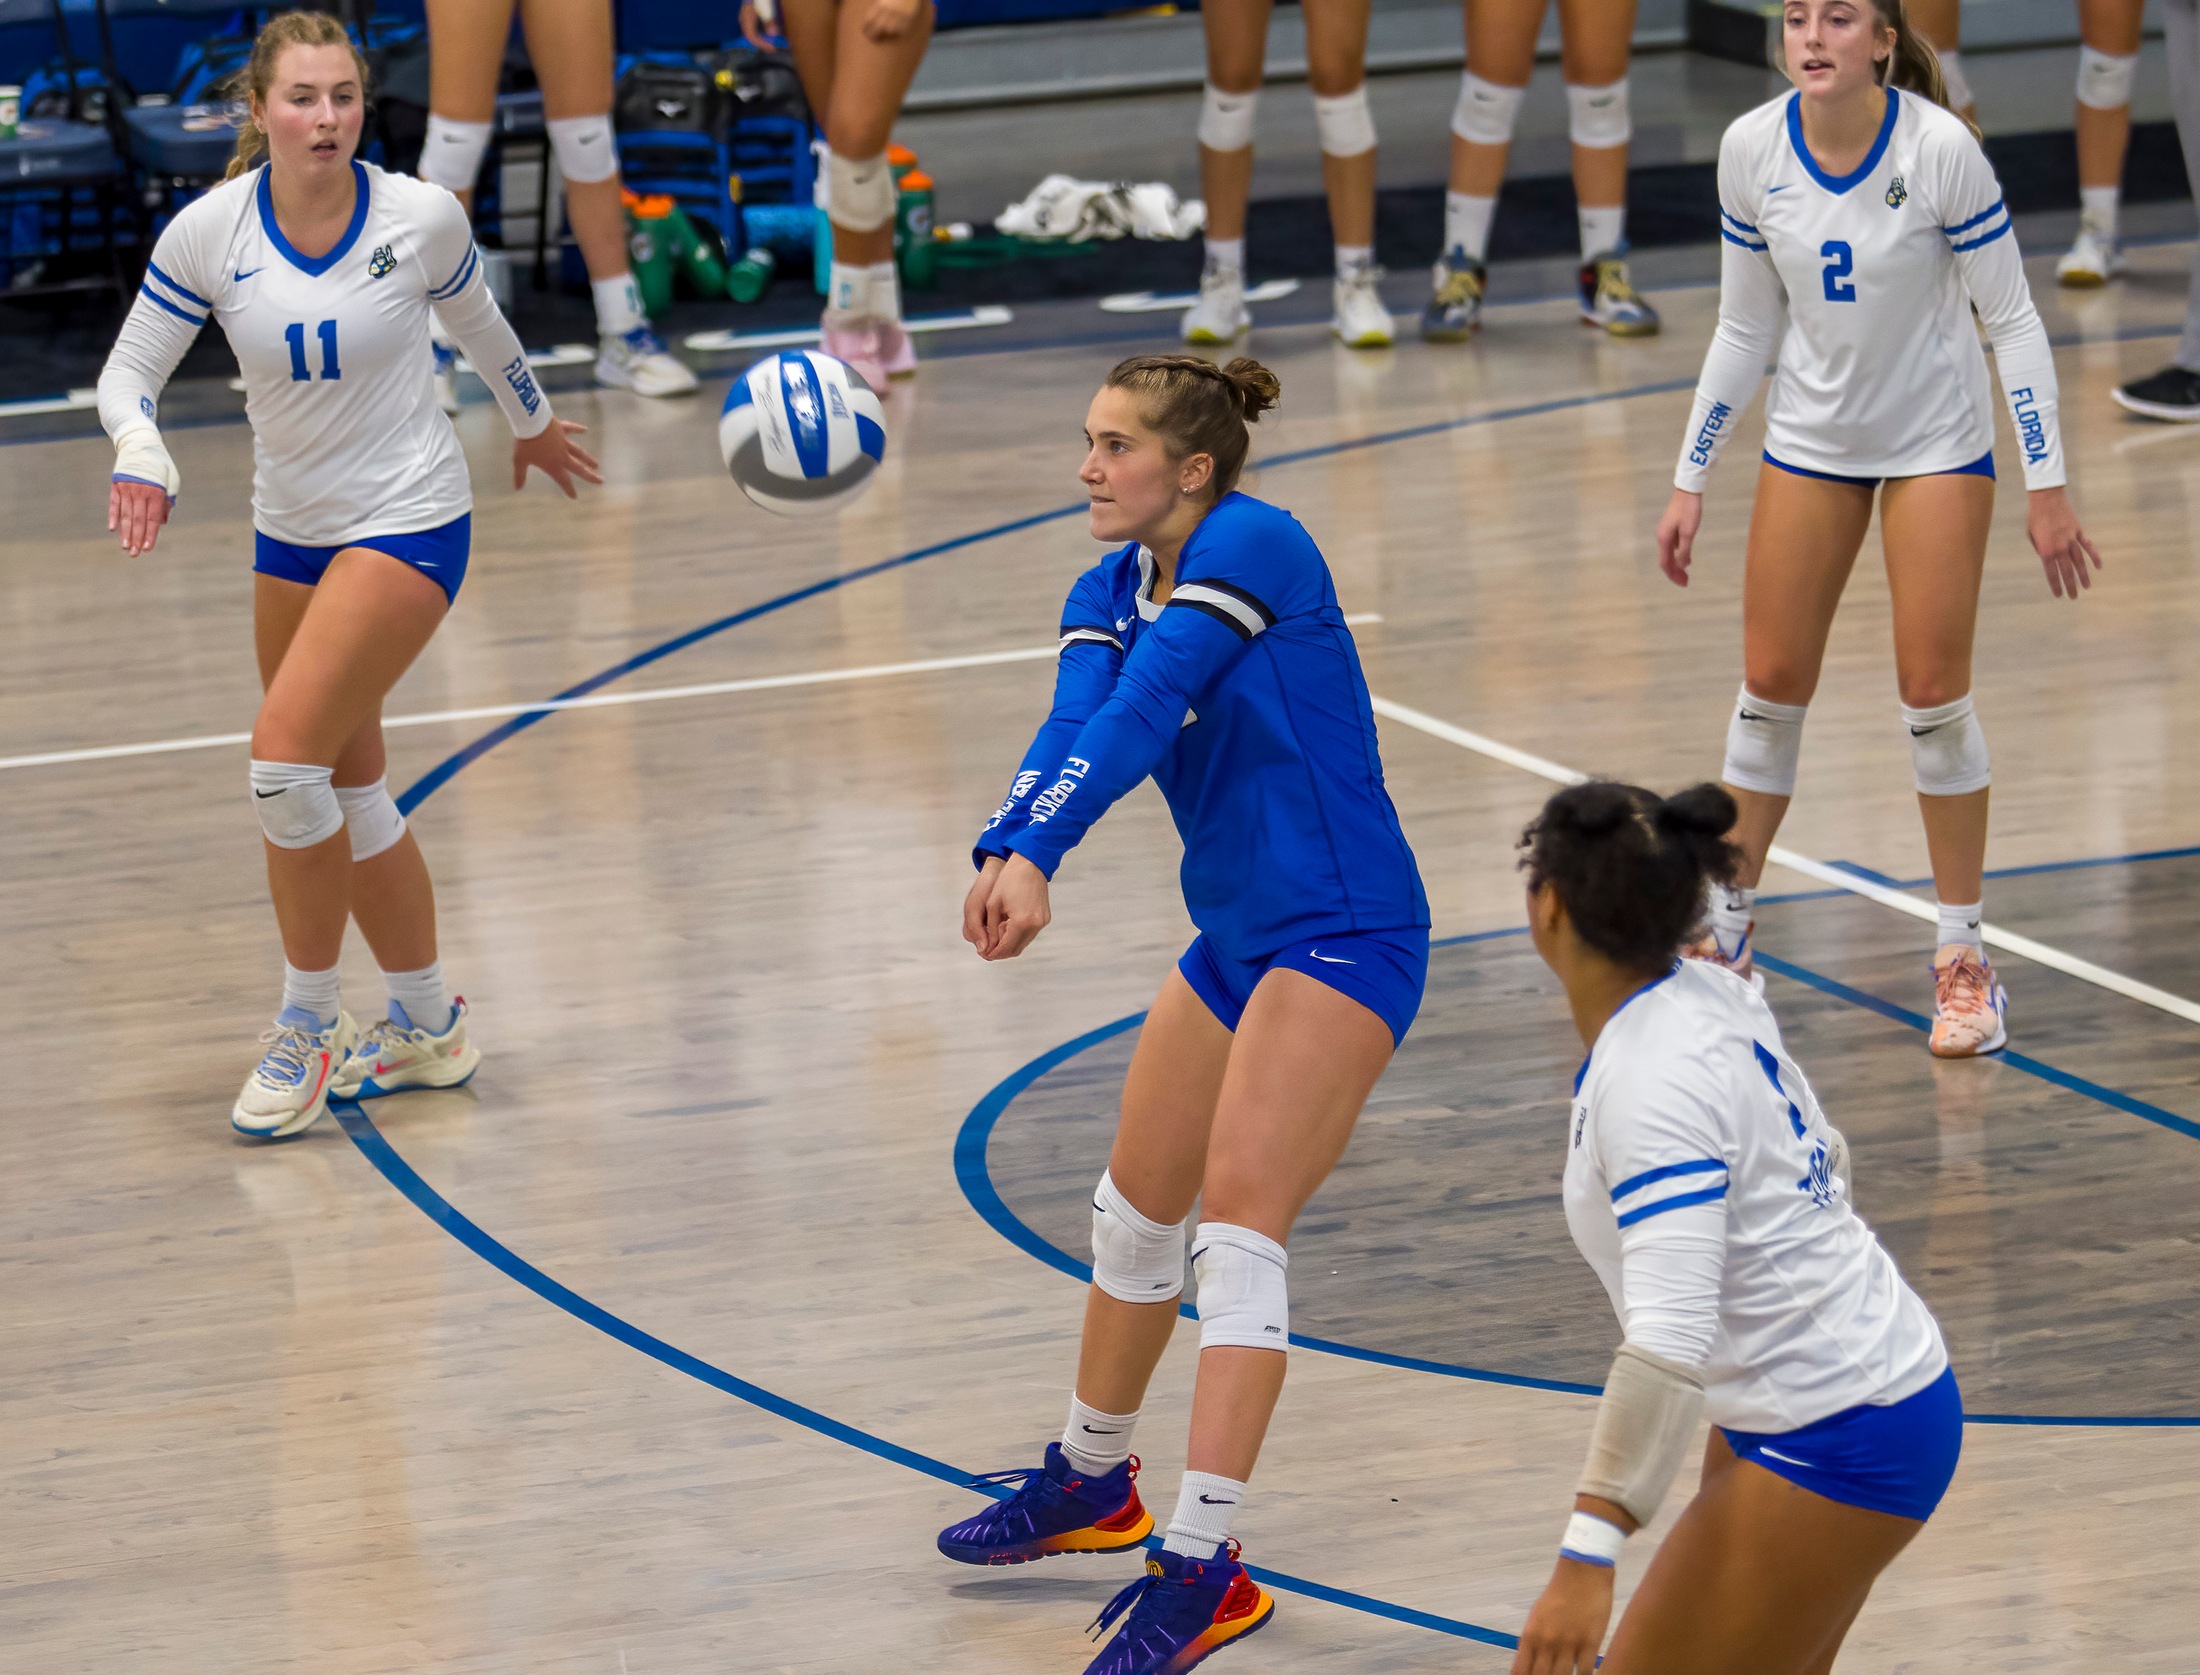 Women's volleyball team up to No. 17 in national poll